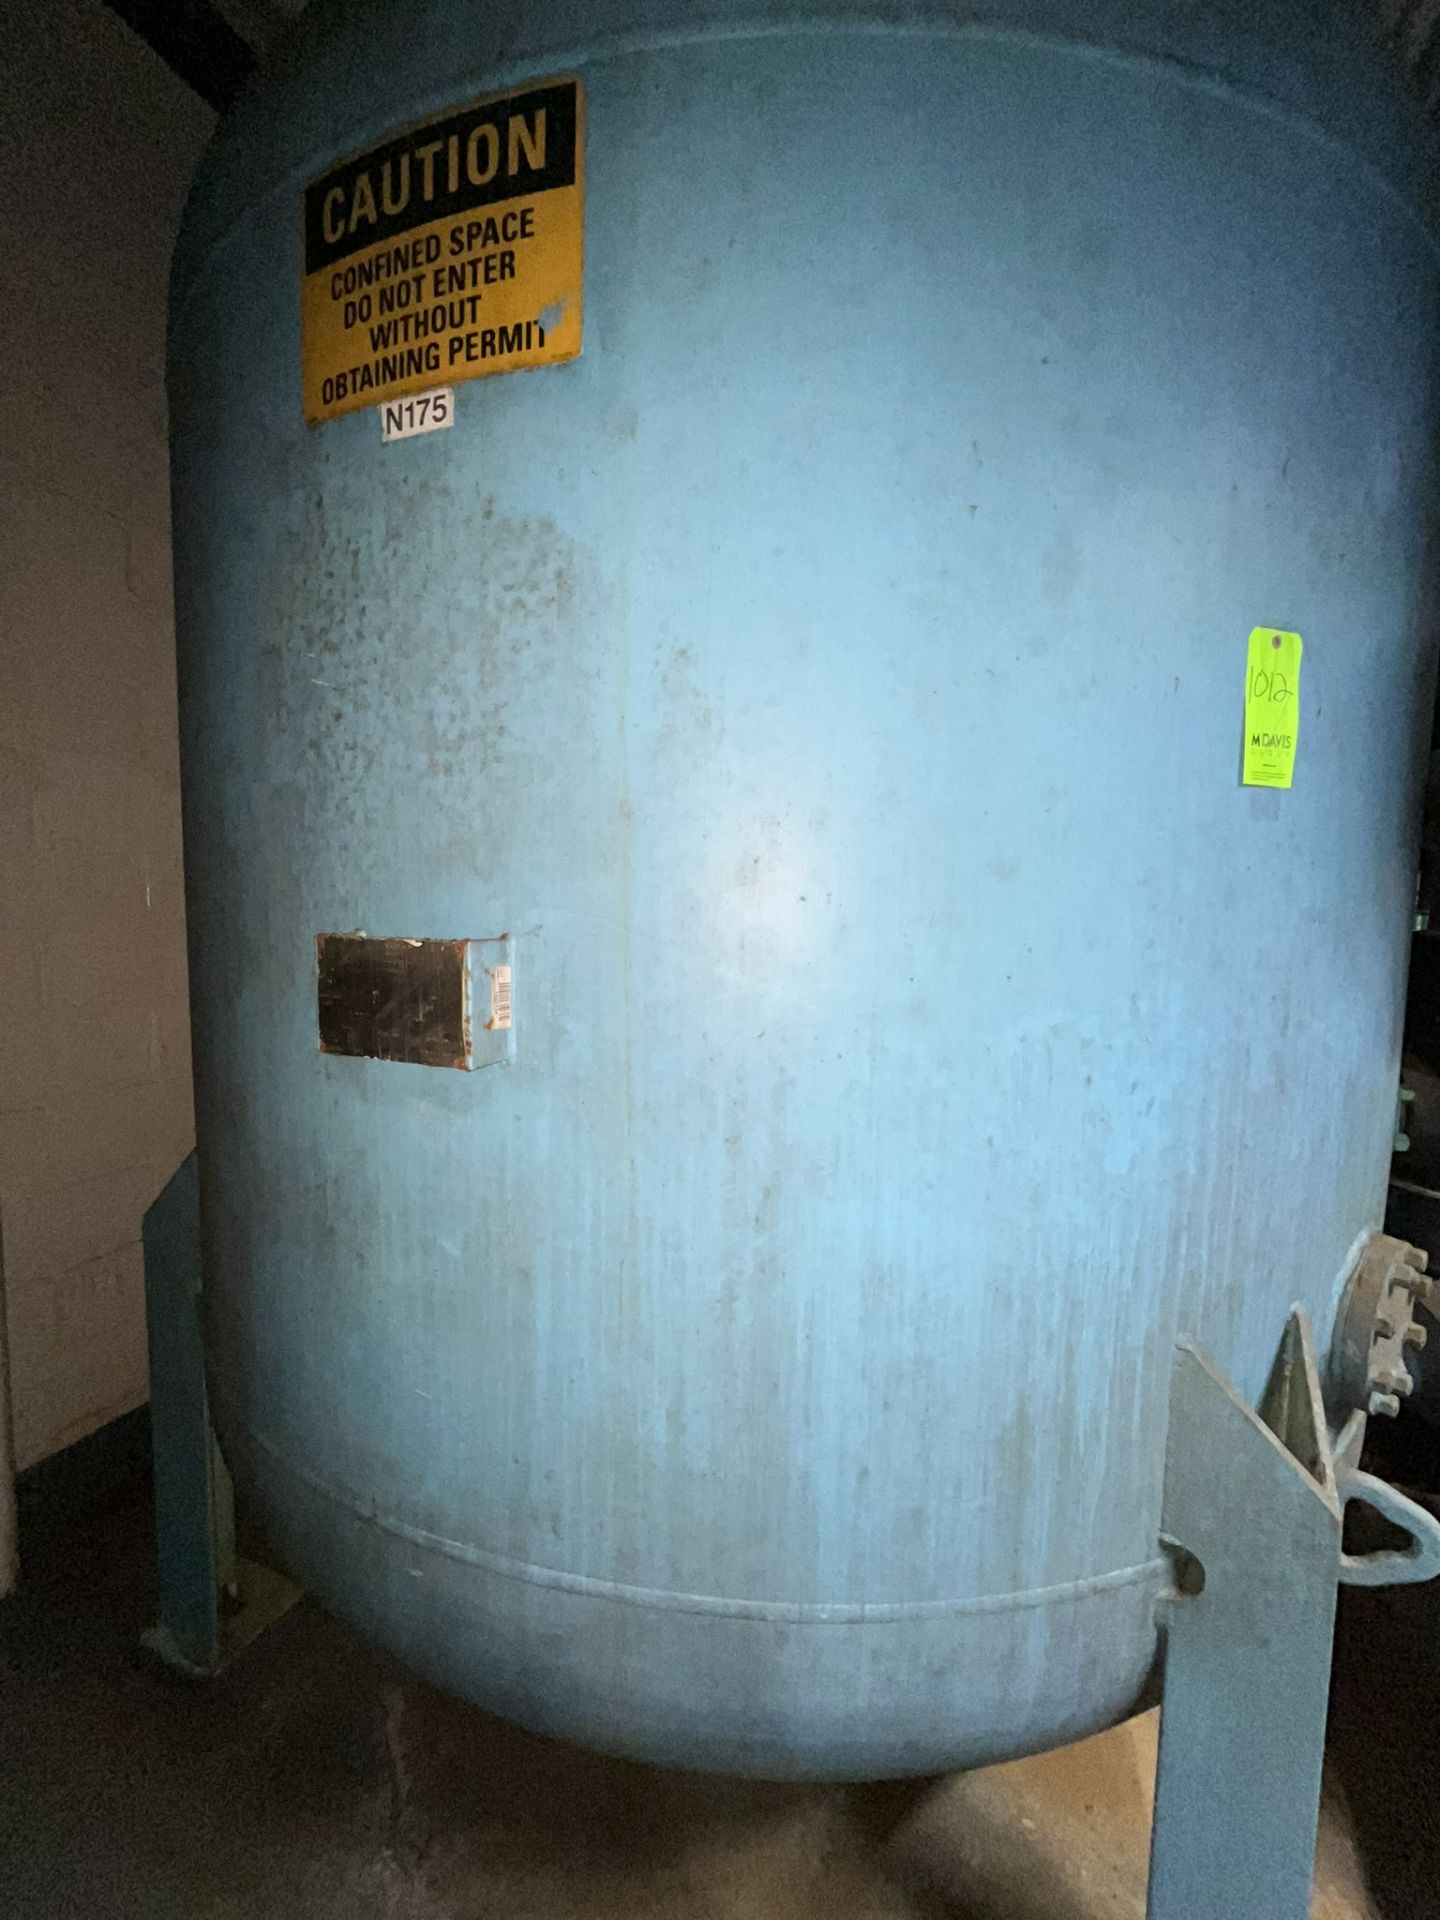 LESENA STEEL FAB VERTICAL AIR TANK (Located Freehold, NJ) (Simple Loading Fee $3,850)